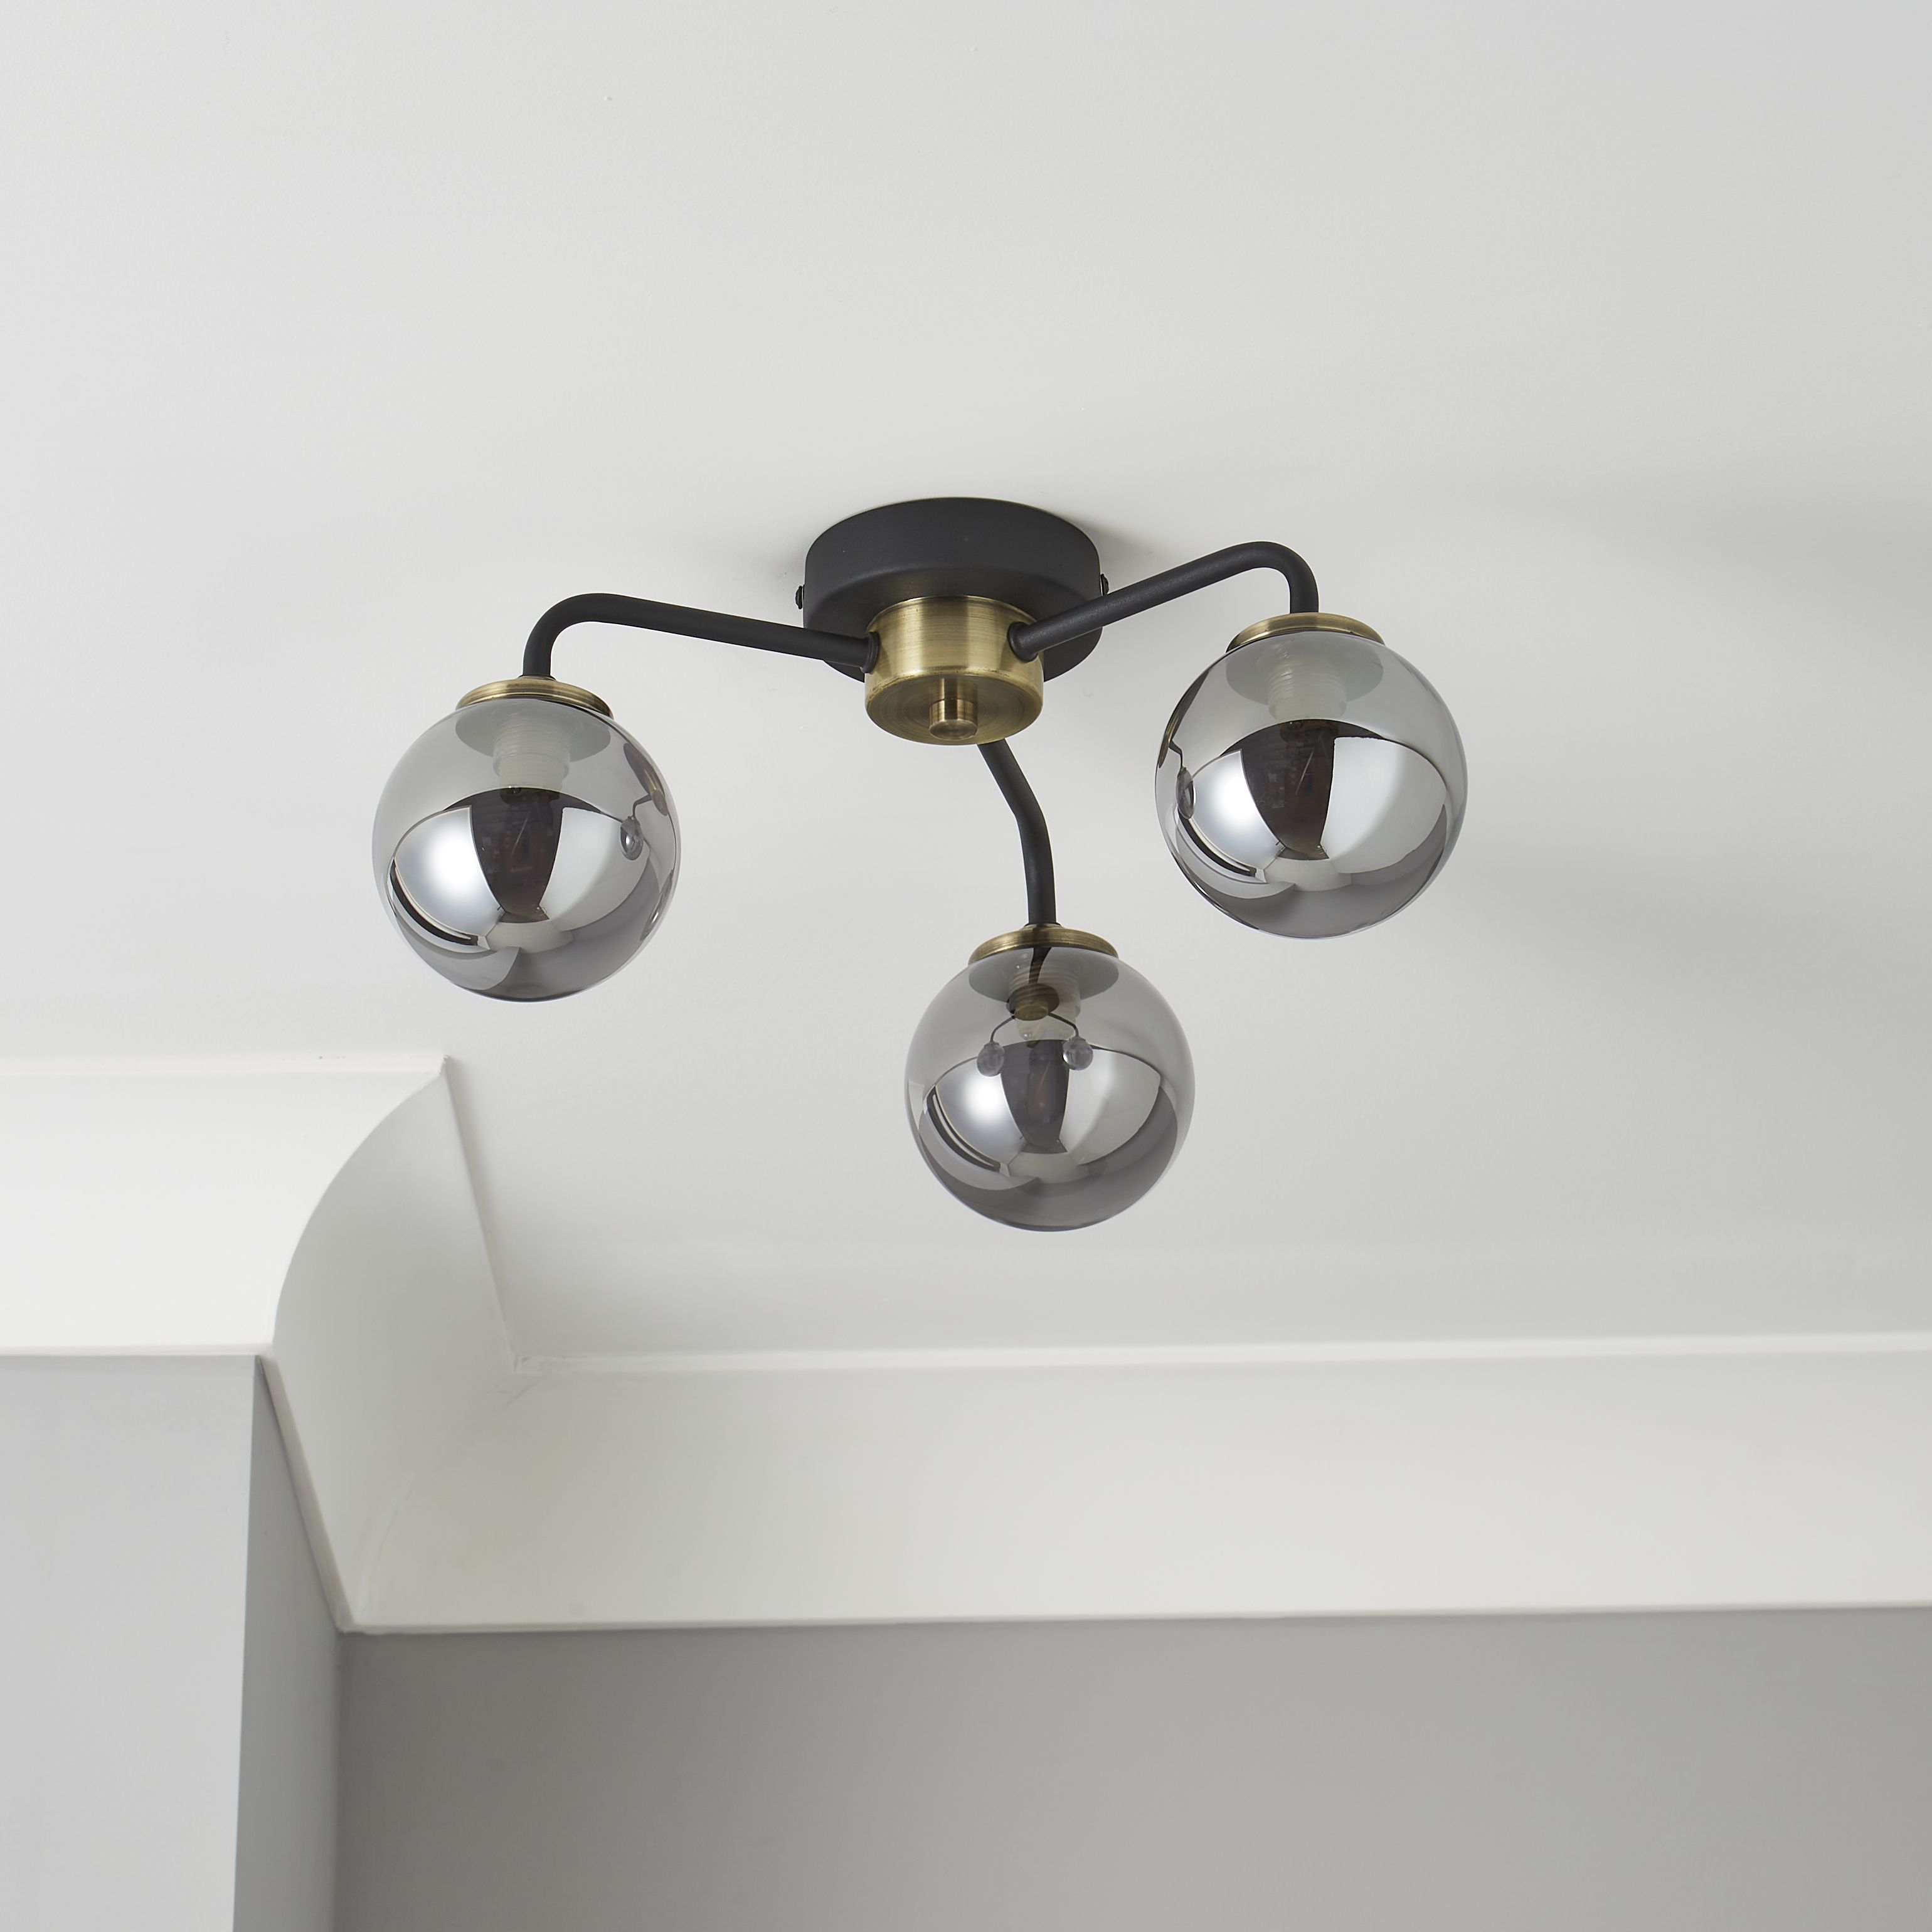 Inlight Agile Glass & steel Black Antique brass & smoked glass effect 3 Lamp LED Ceiling light